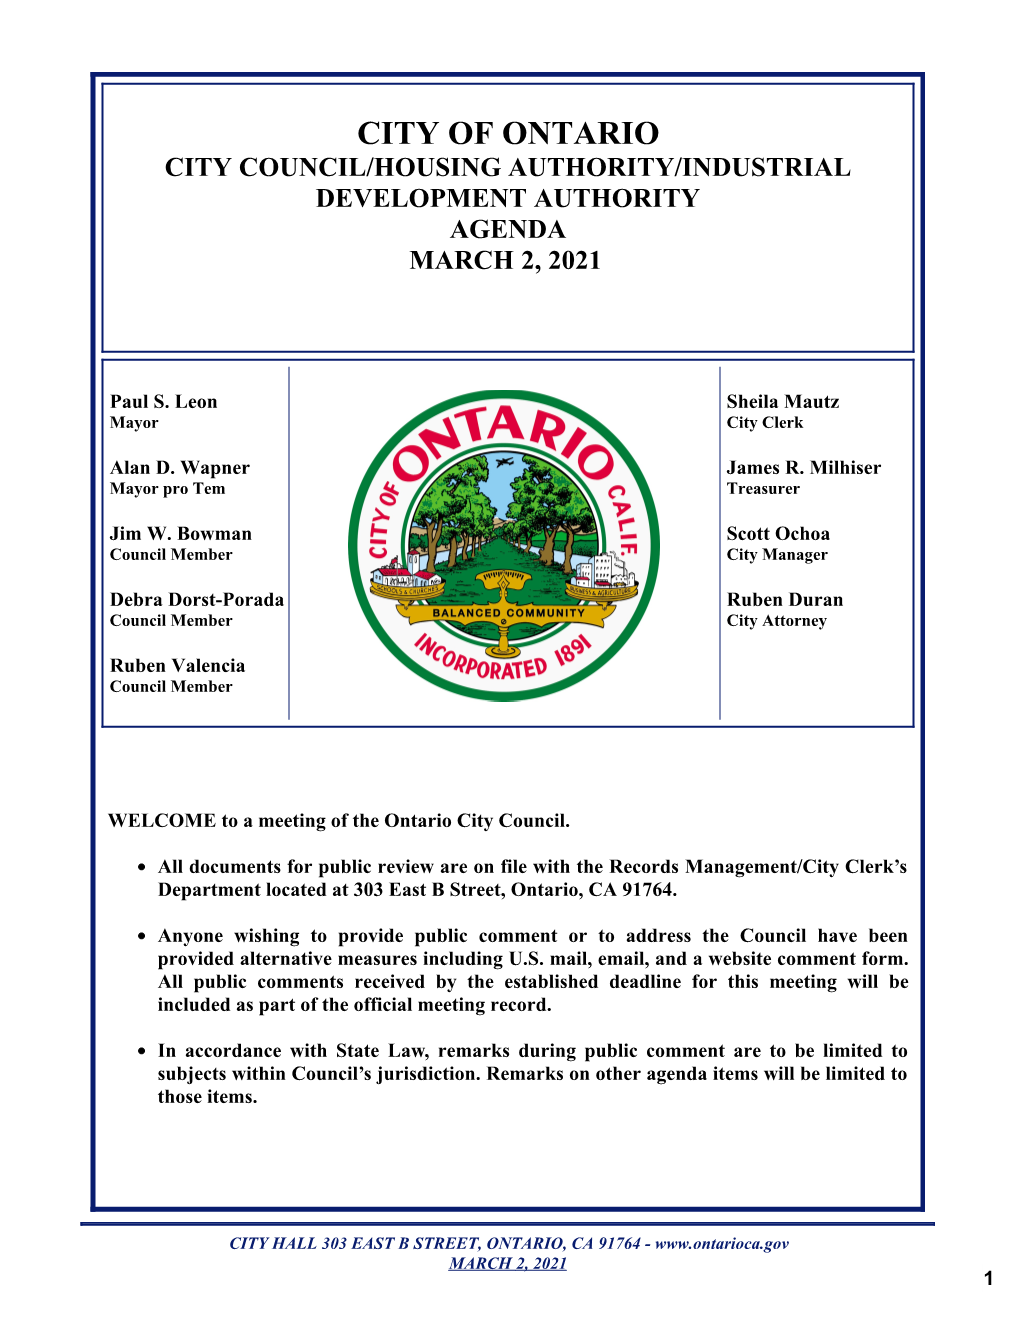 City of Ontario City Council/Housing Authority/Industrial Development Authority Agenda March 2, 2021